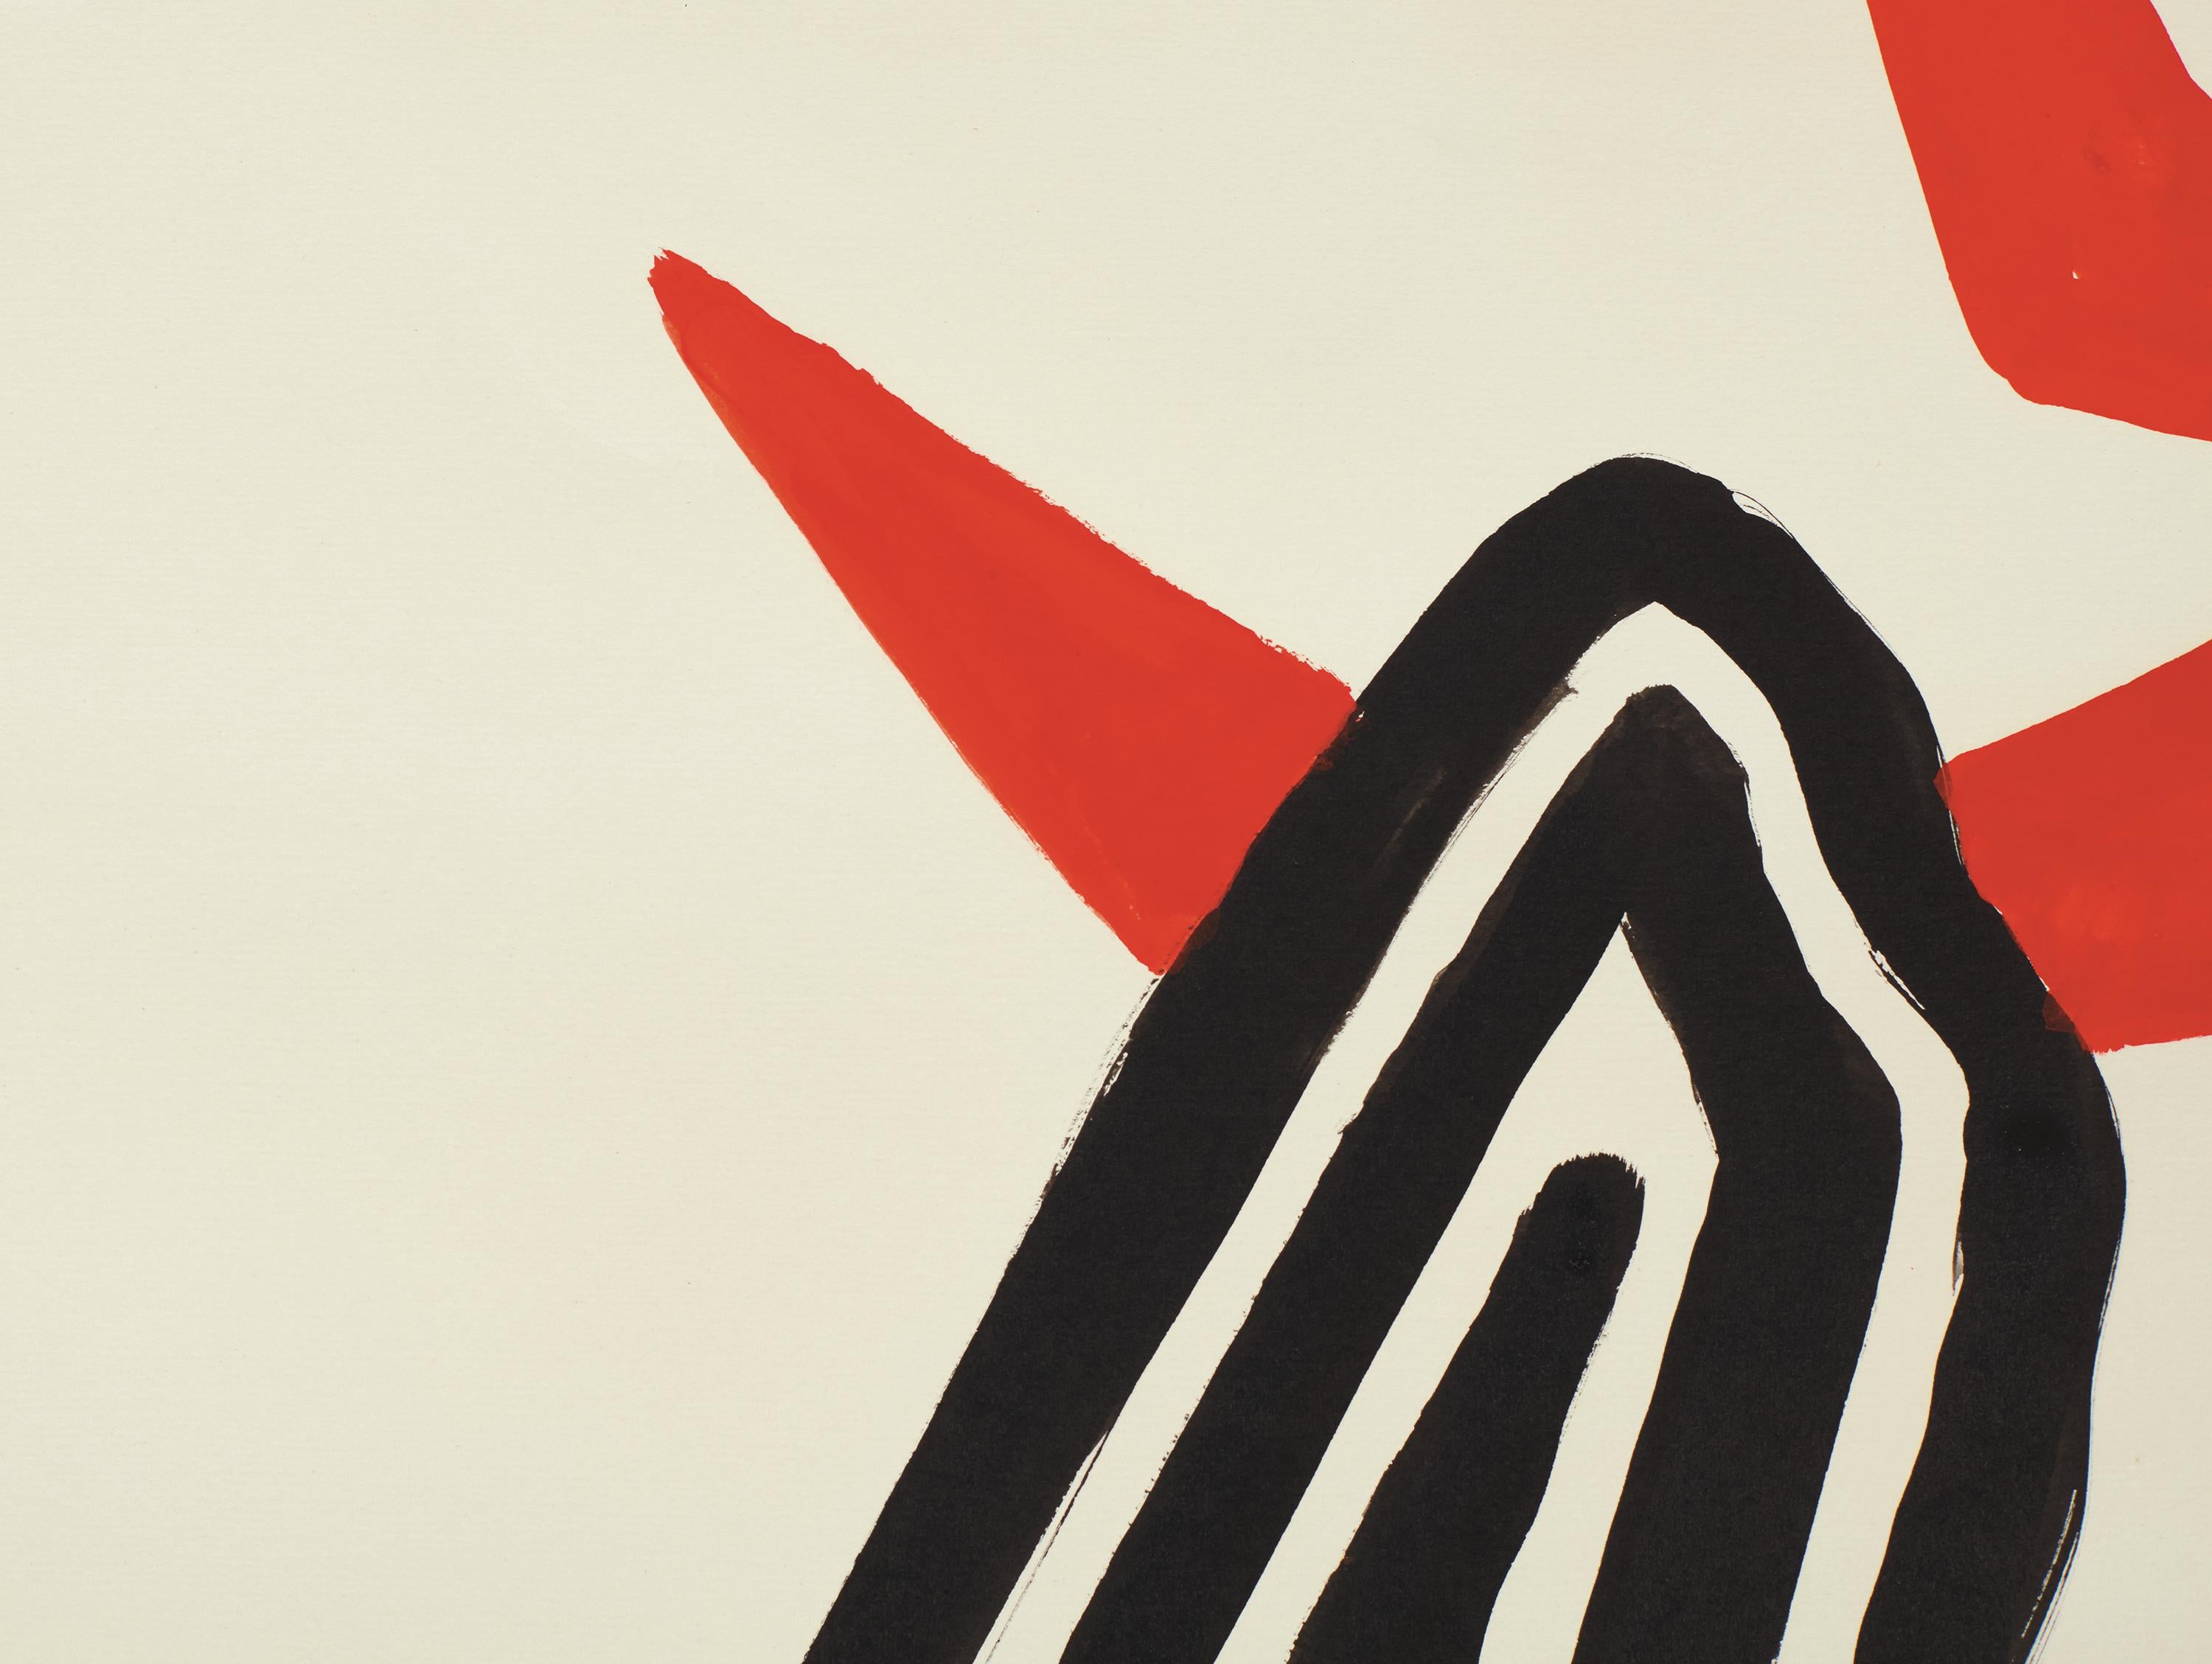 Zigzag Sun and Crags - Post-War Painting by Alexander Calder